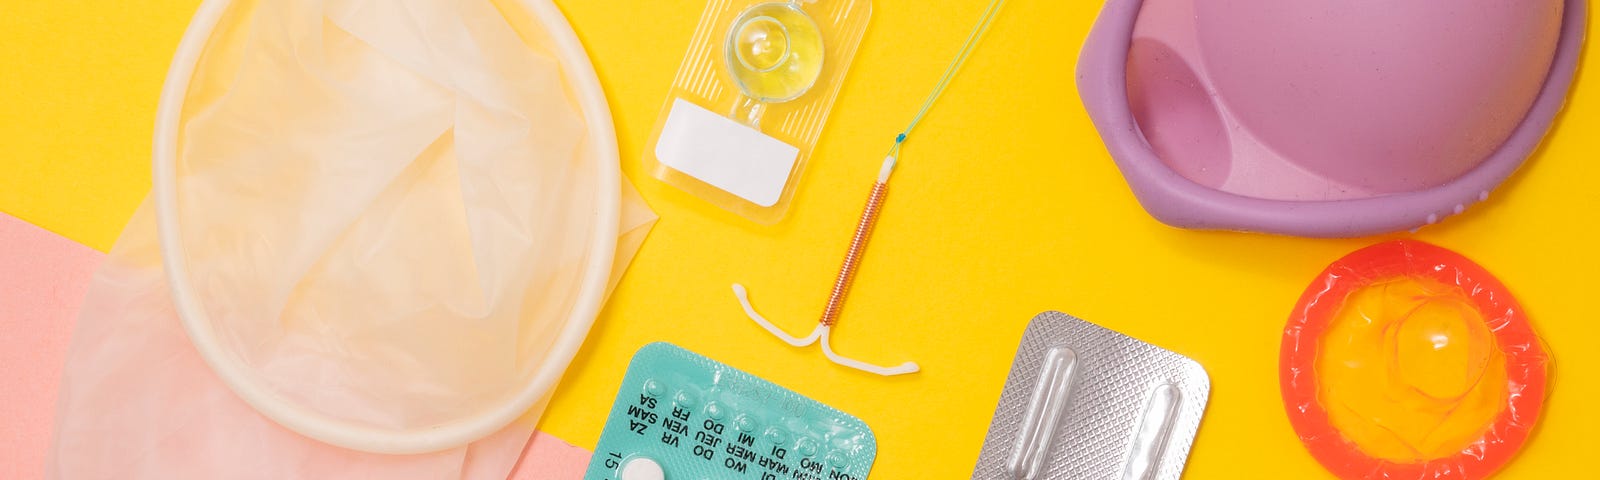 variety of reproductive health supplies including condom, birth control pill and IUD